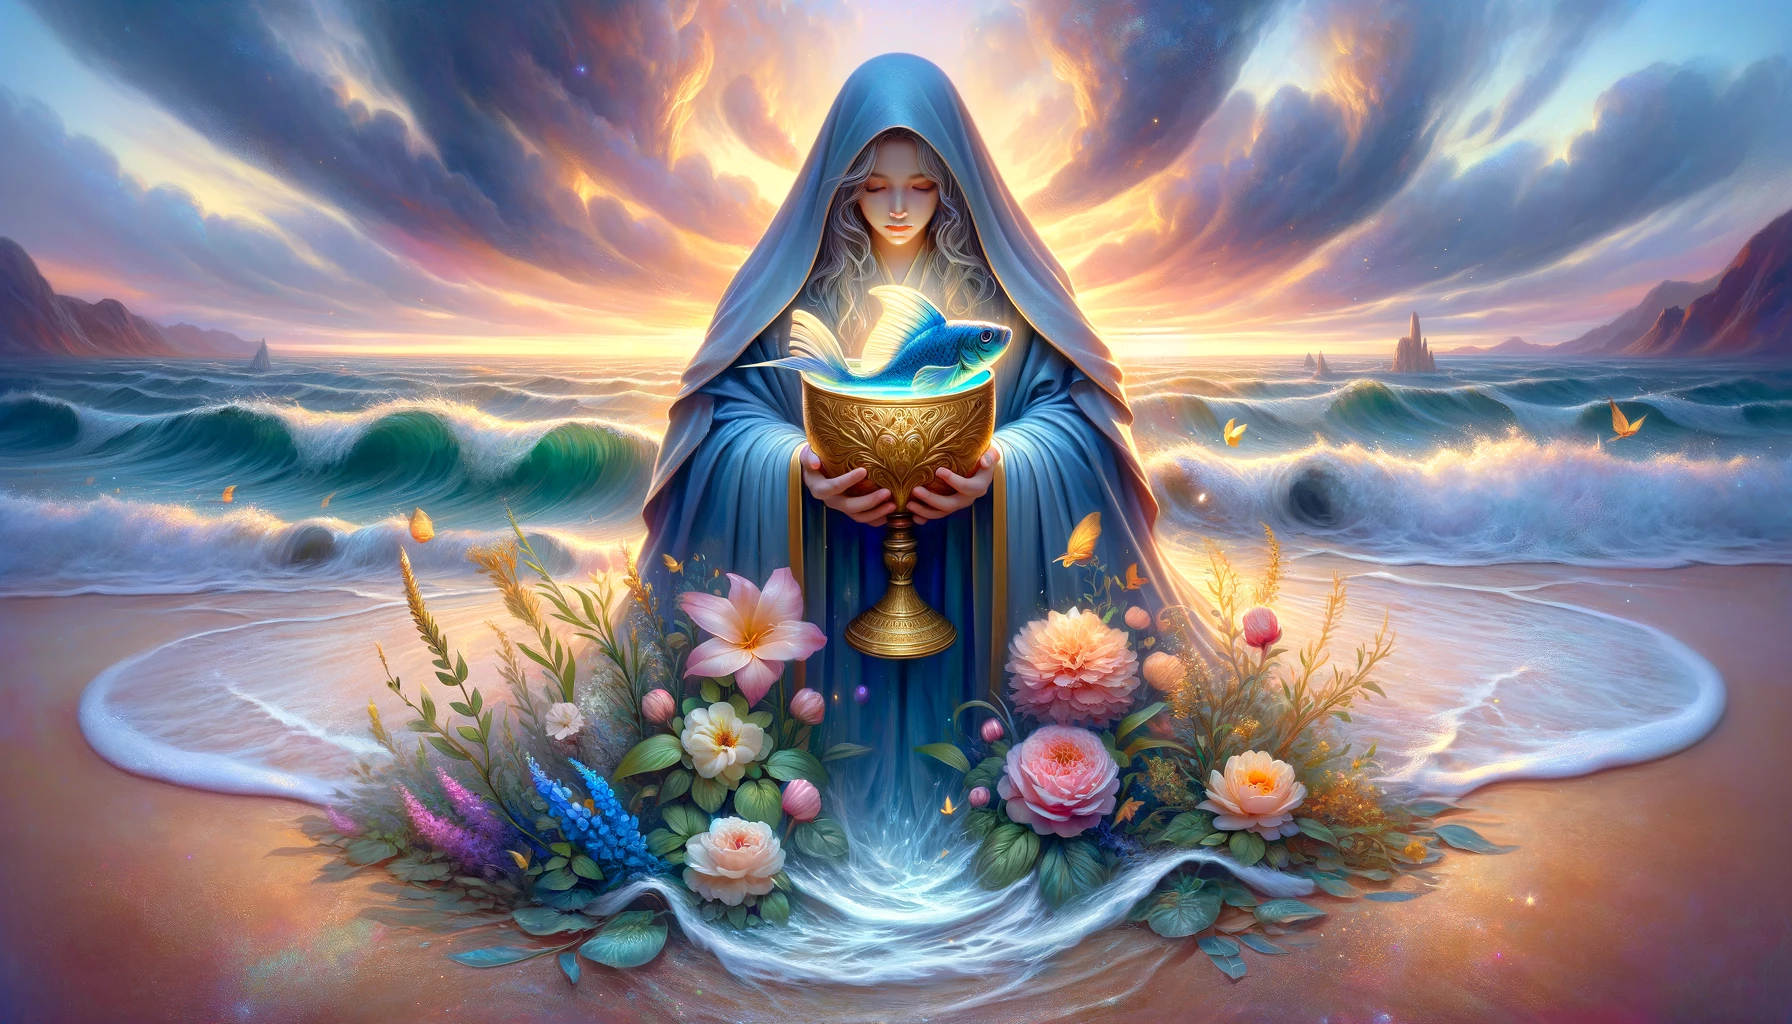 An image featuring a young person dressed in flowing blue robes holding a golden chalice with a fish swimming inside. Surround them with gentle waves